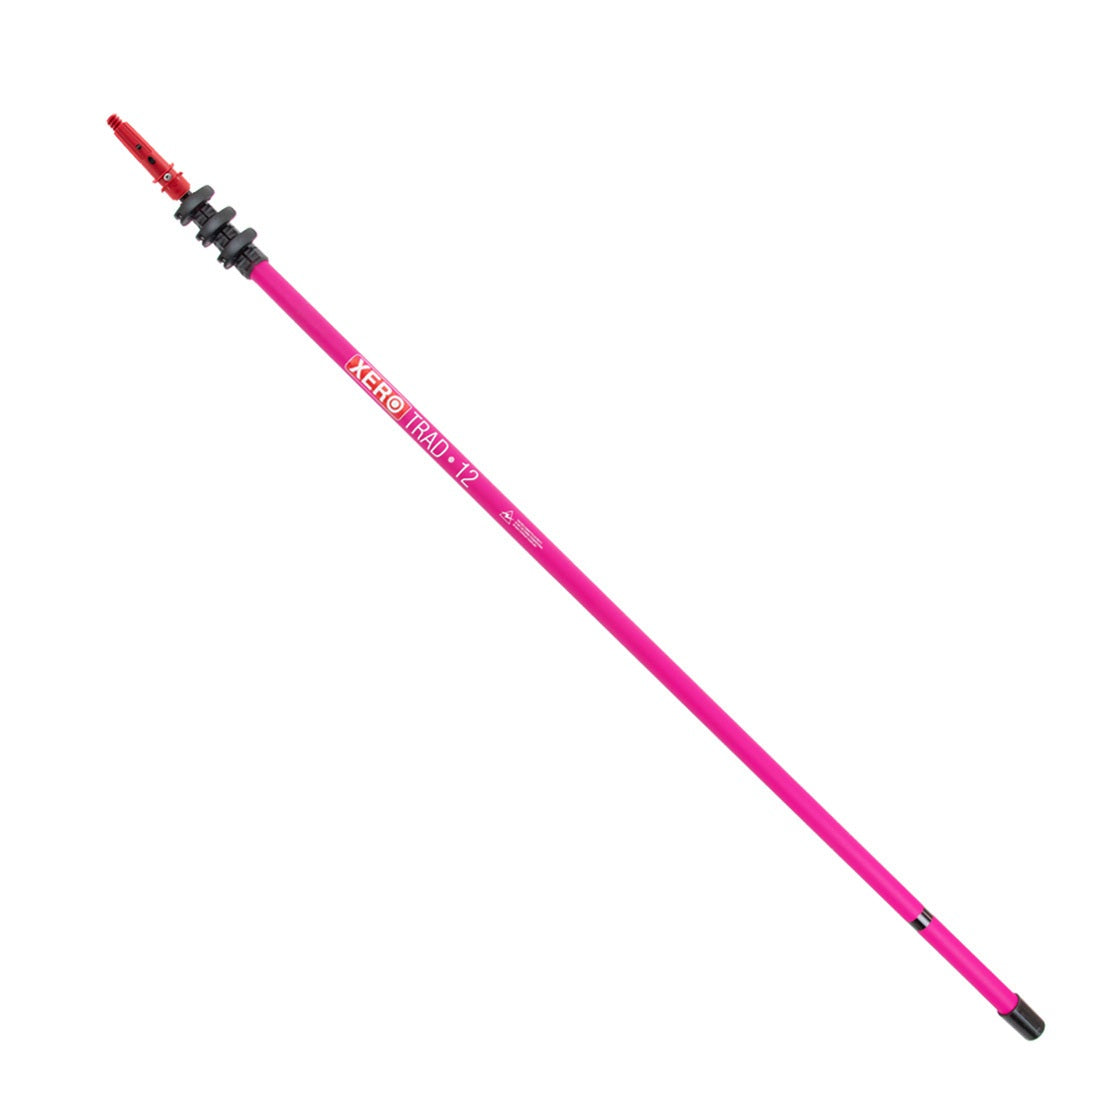 XERO Carbon Fiber Trad Pole 2.0 Unger Tip - Hot Pink 12 Foot Full View